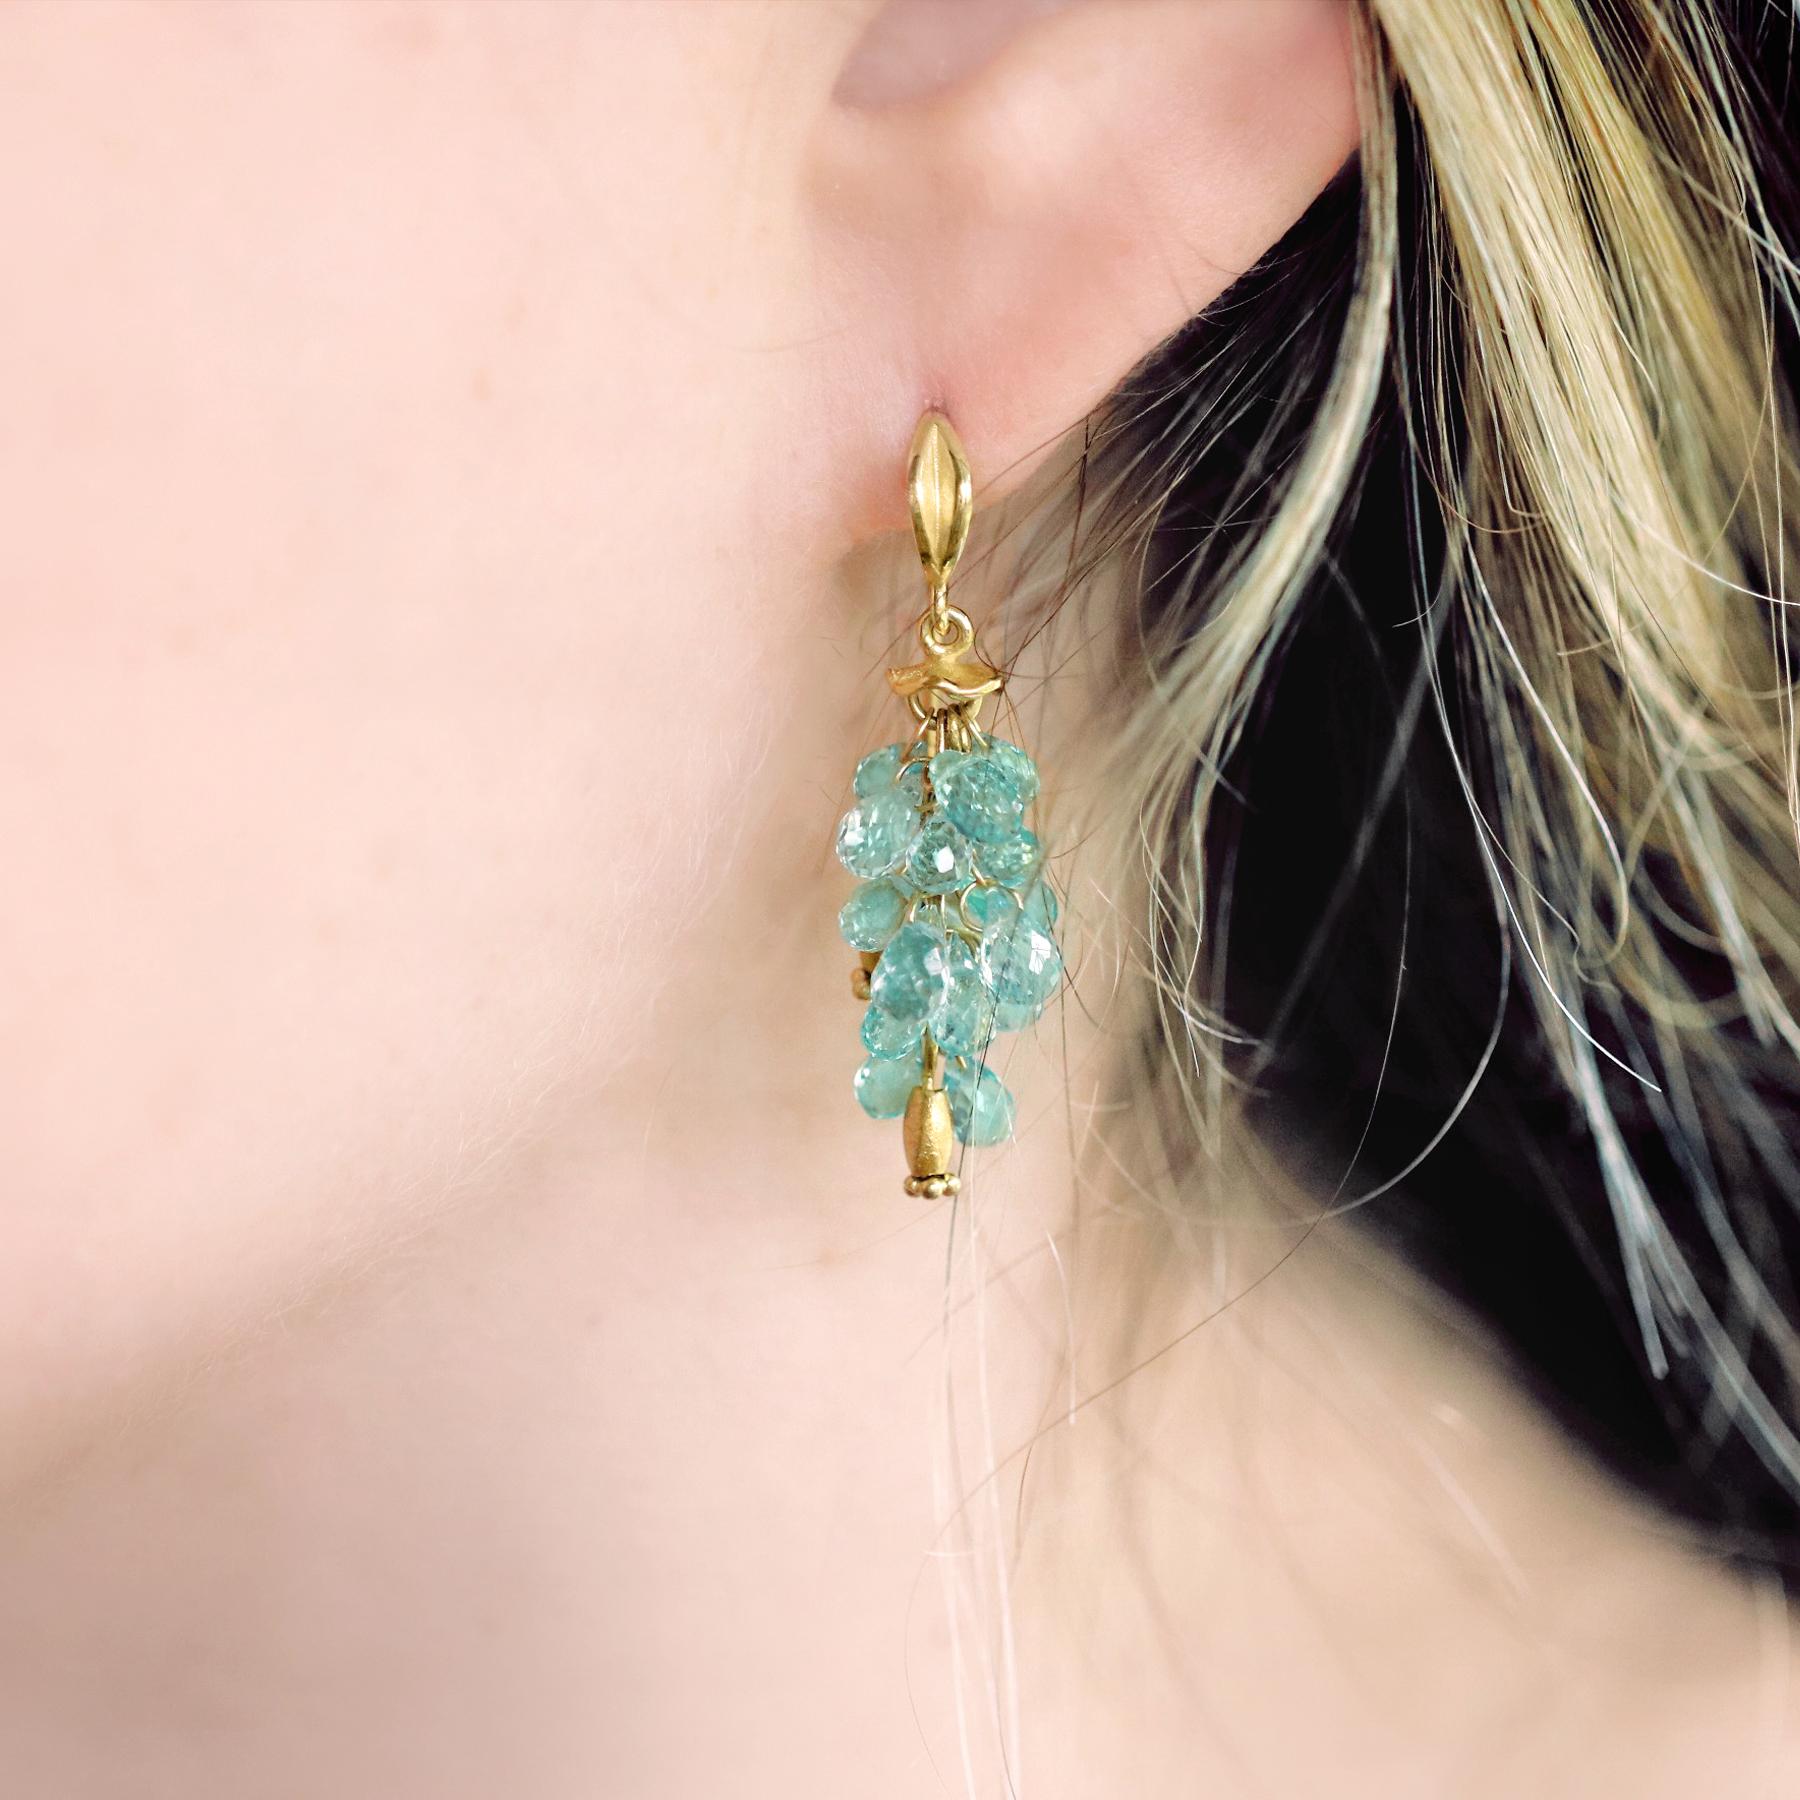 Navette Dangle Drop Earrings handcrafted by award-winning jewelry maker Barbara Heinrich in signature-finished 18k yellow gold showcasing 9.80 total carats of beautiful, faceted seafoam emerald briolettes and accented with wavy tops and leaf petal